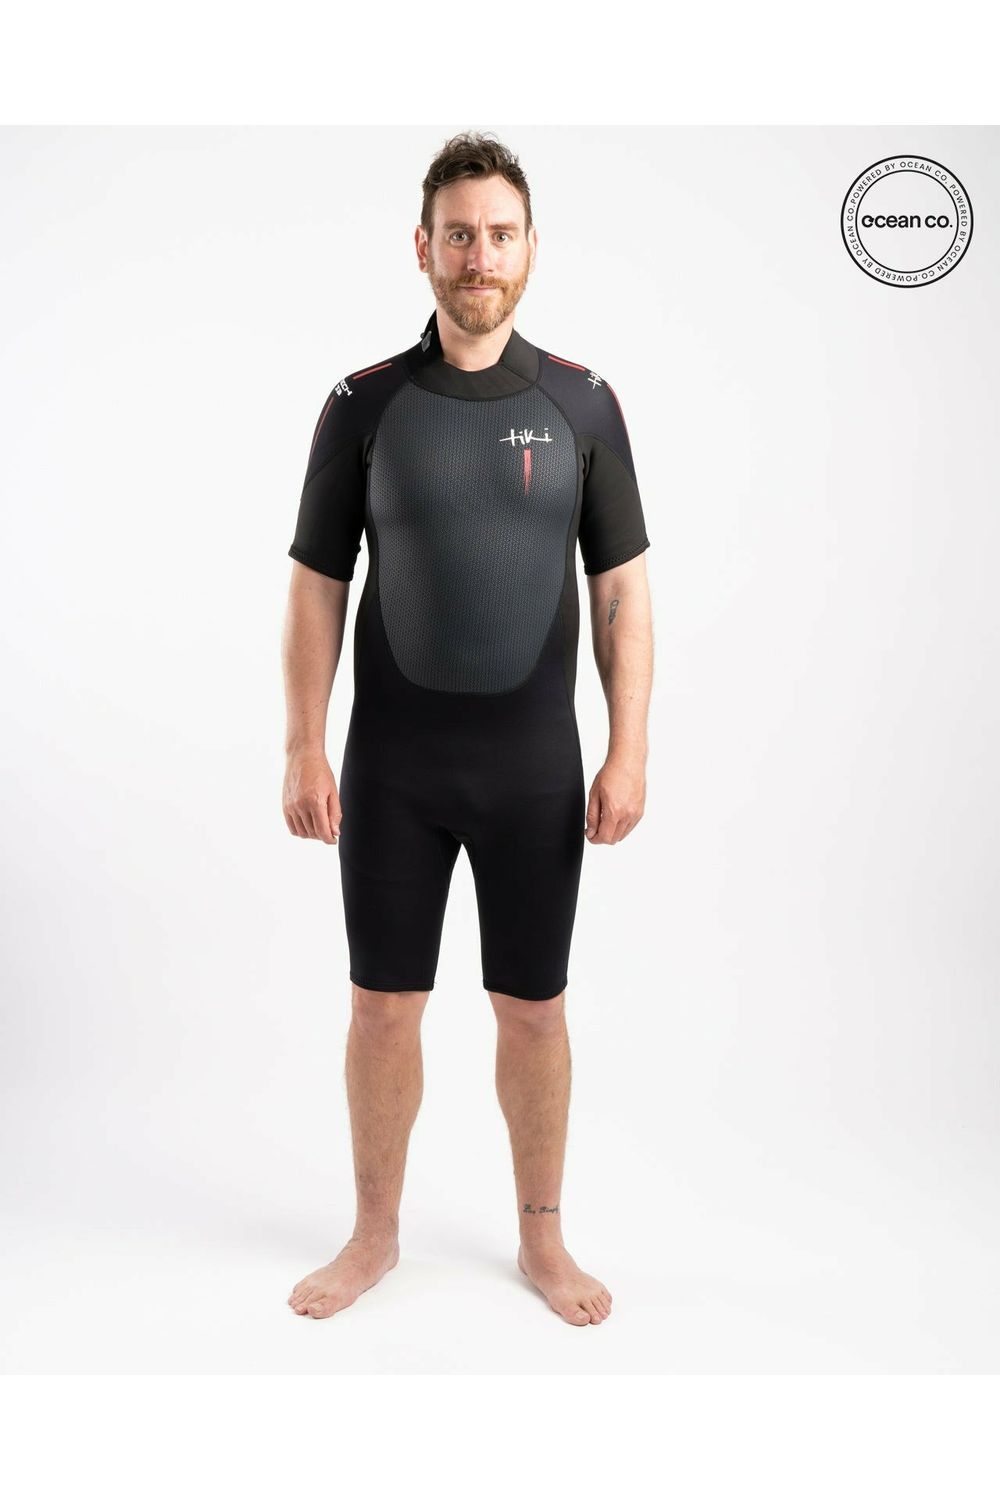 Tiki Tech 3/2 Spring Wetsuit with Back Zip - Black & Red